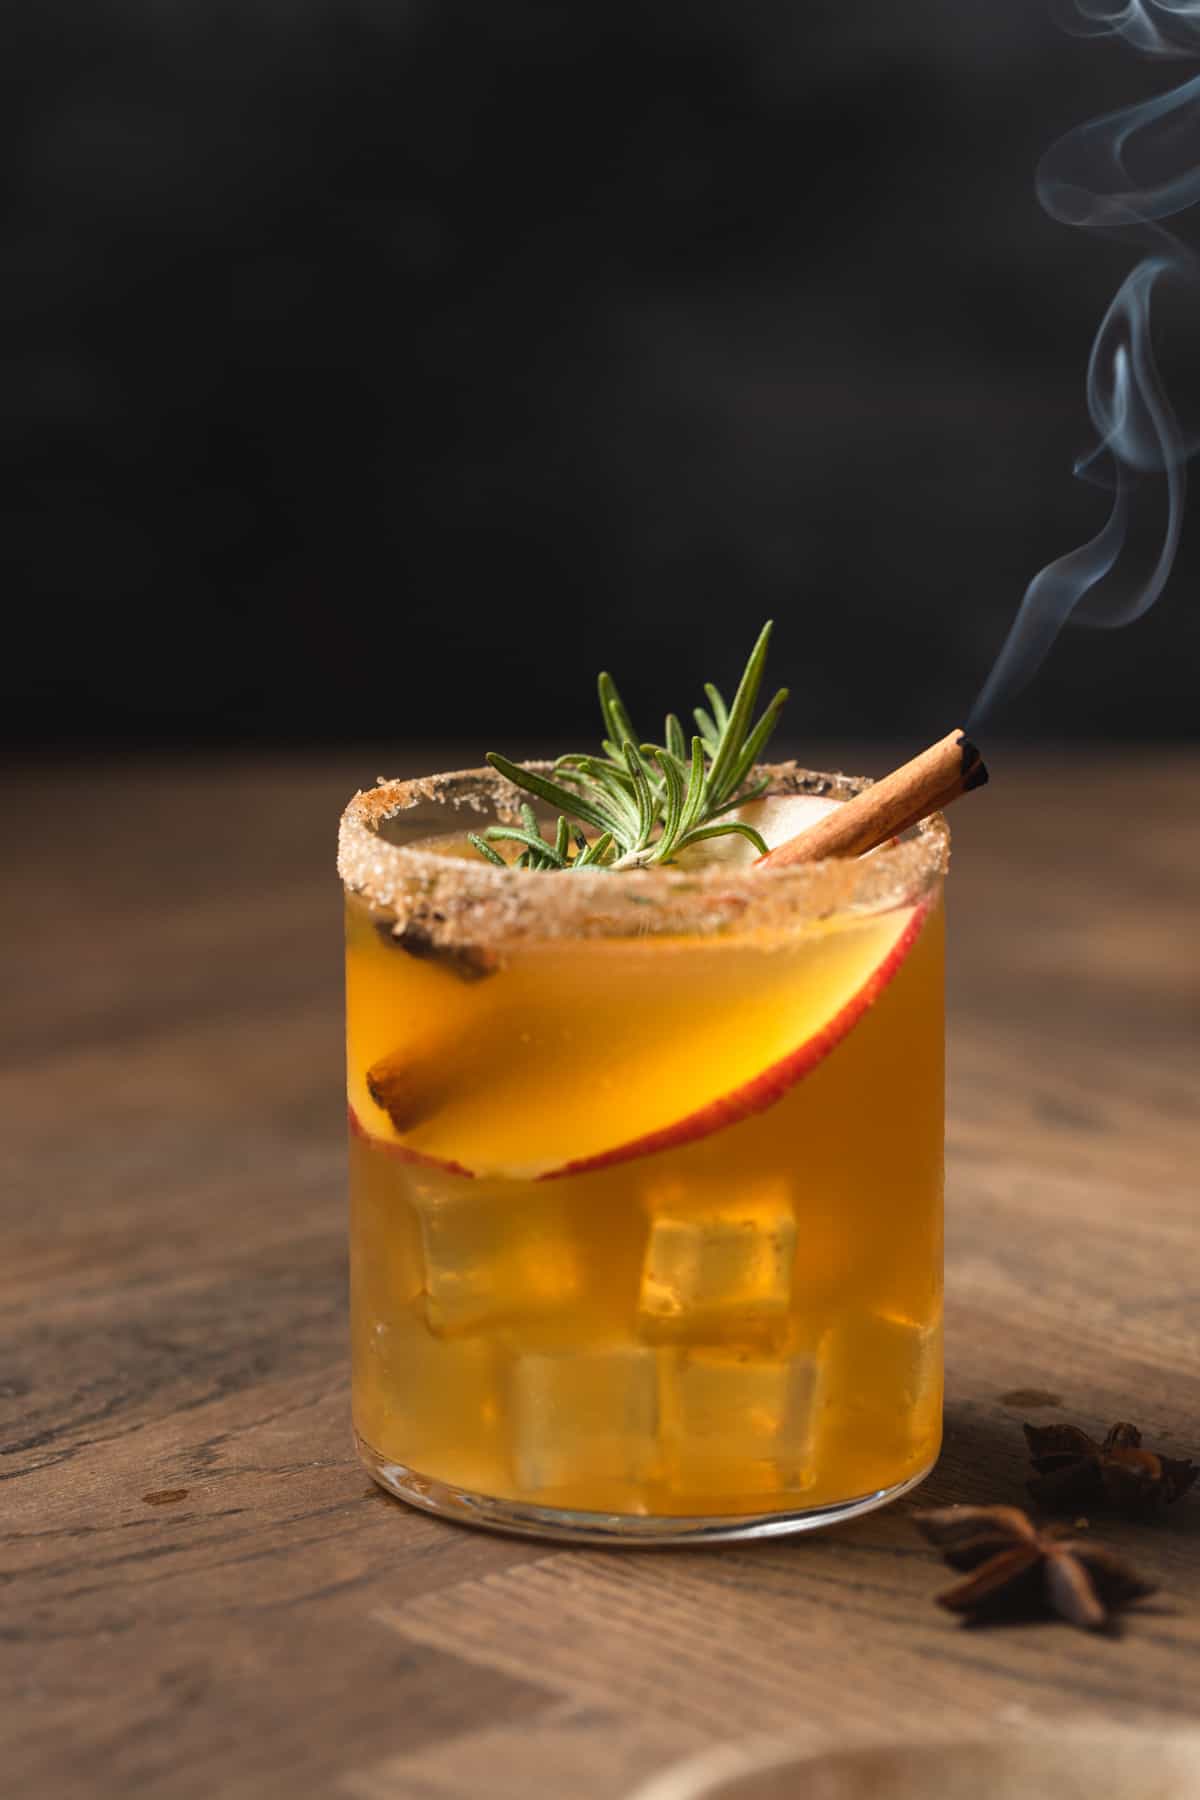 An orange cocktail garnished with an apple slice, rosemary, and a smoking cinnamon stick.